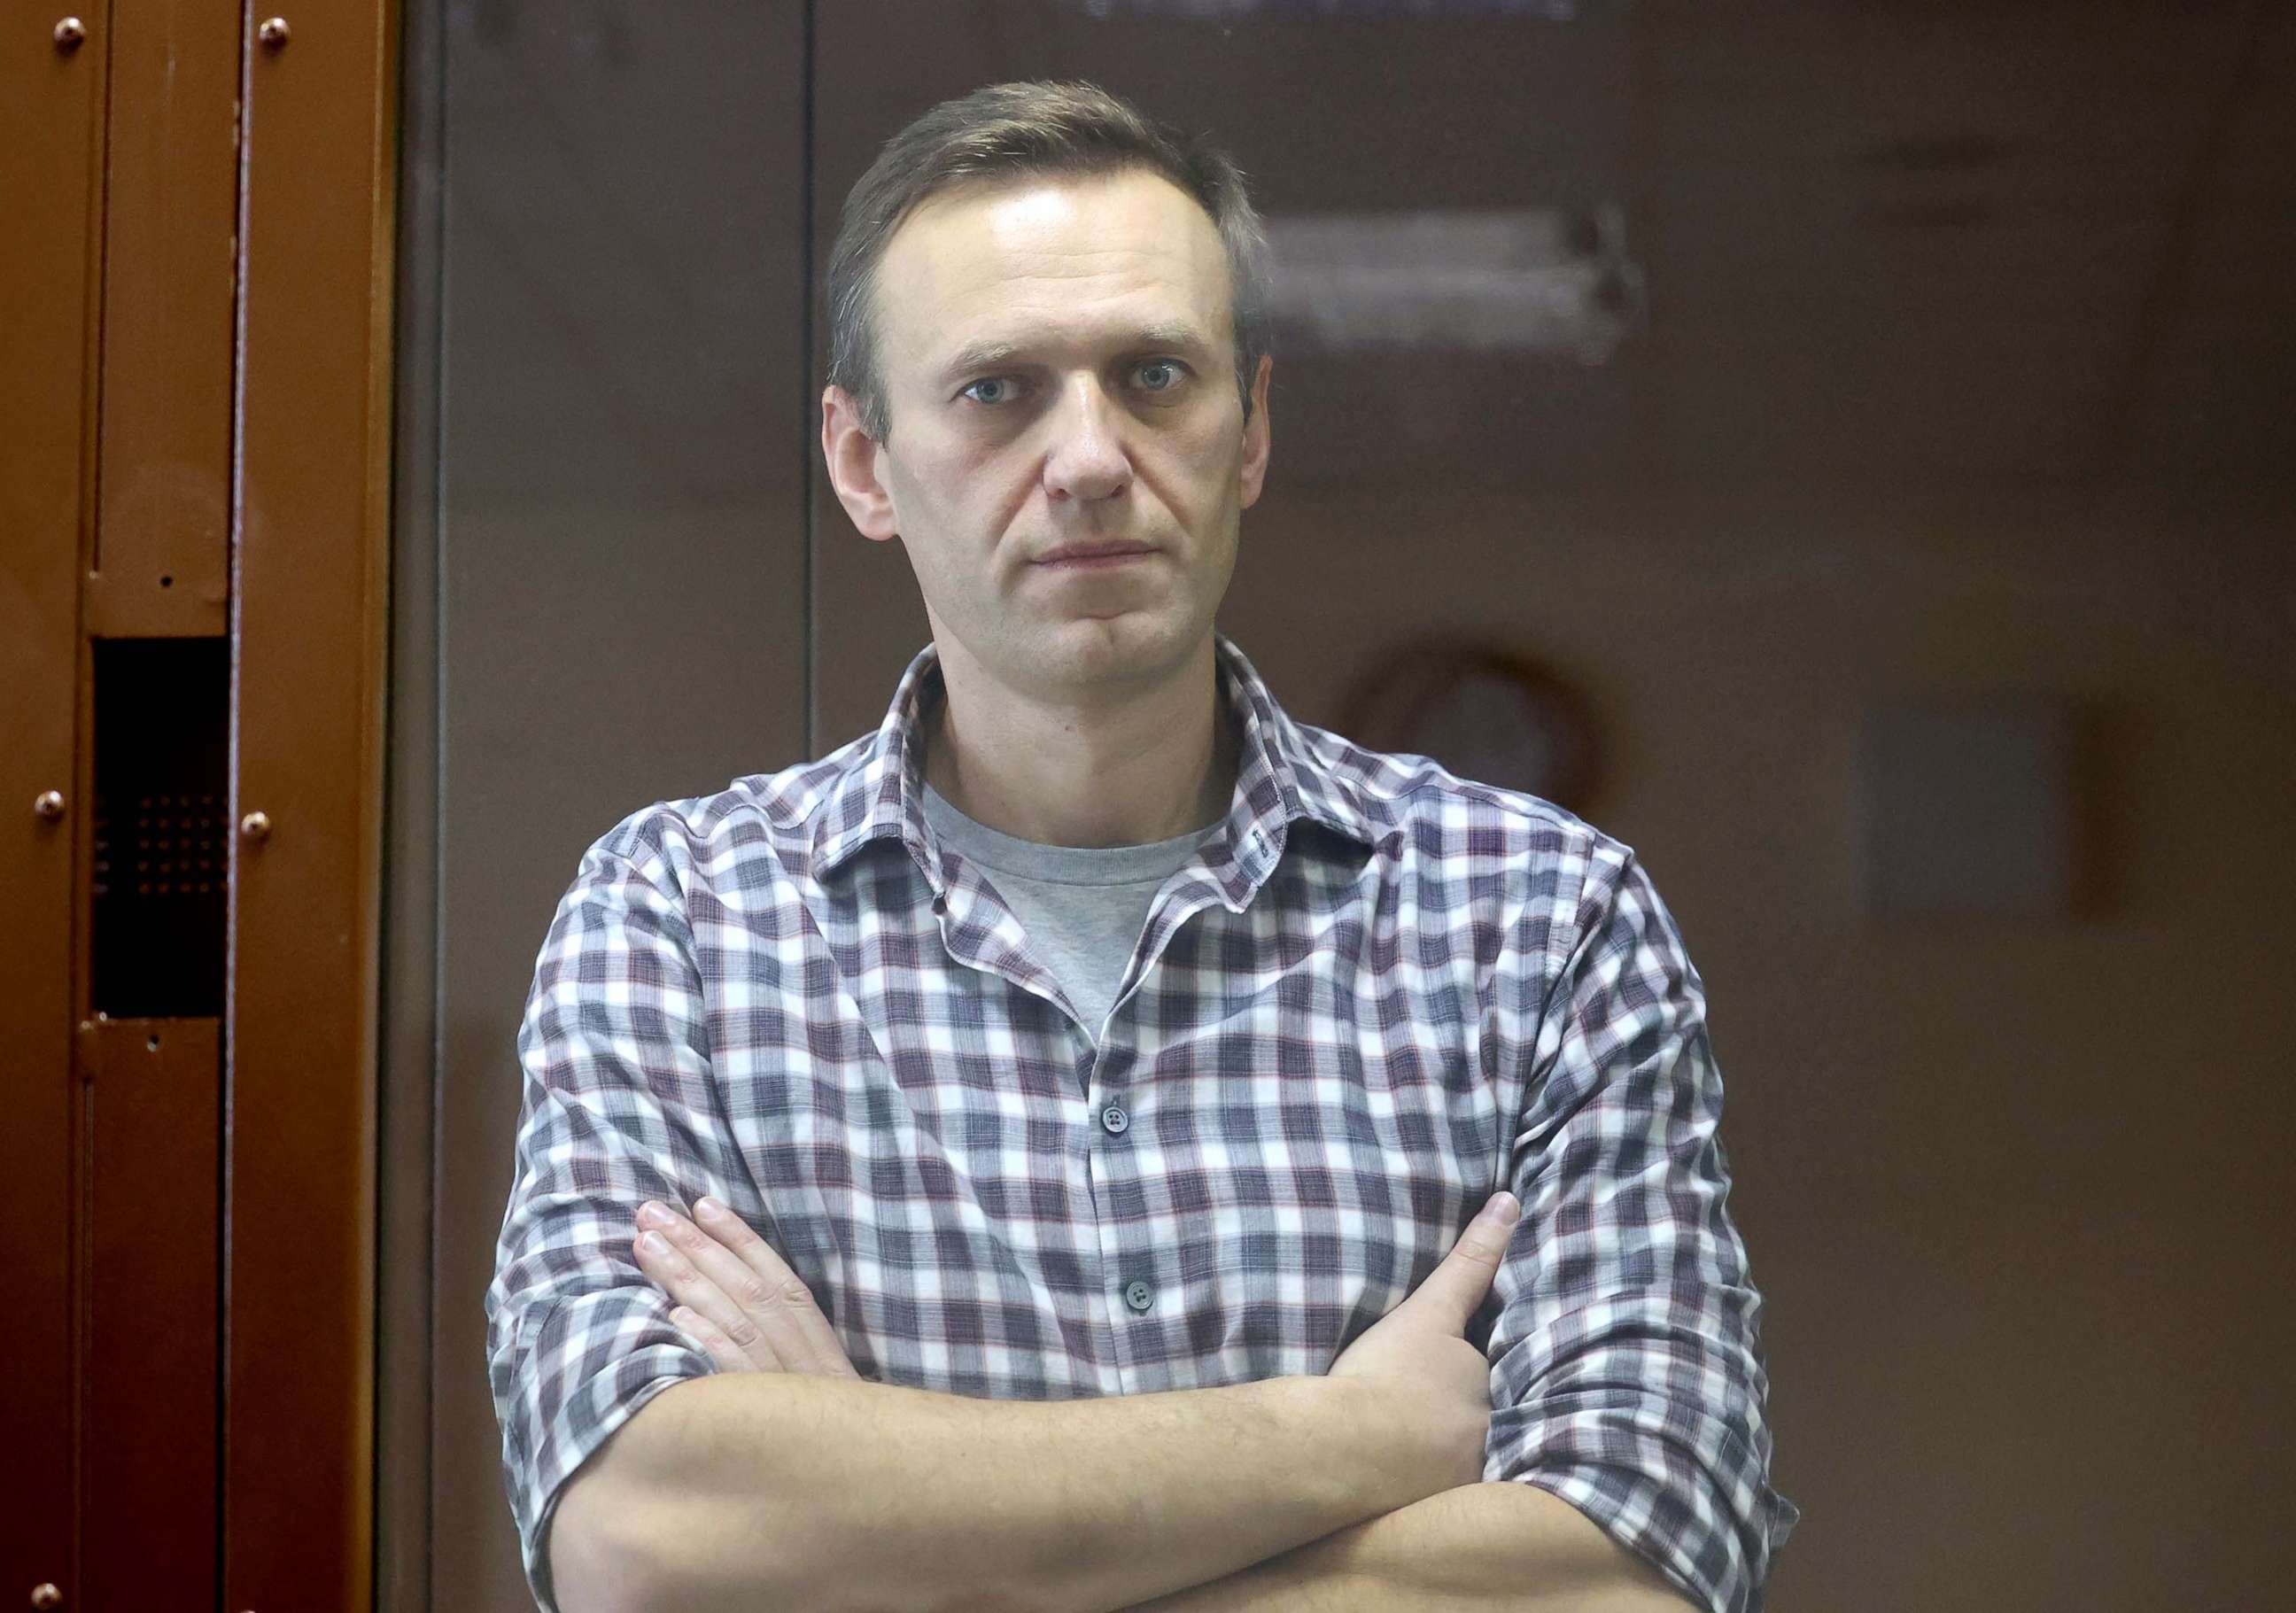 PHOTO: Russian opposition activist Alexei Navalny during an offsite hearing of the Moscow City Court, Feb. 20, 2021, Moscow.